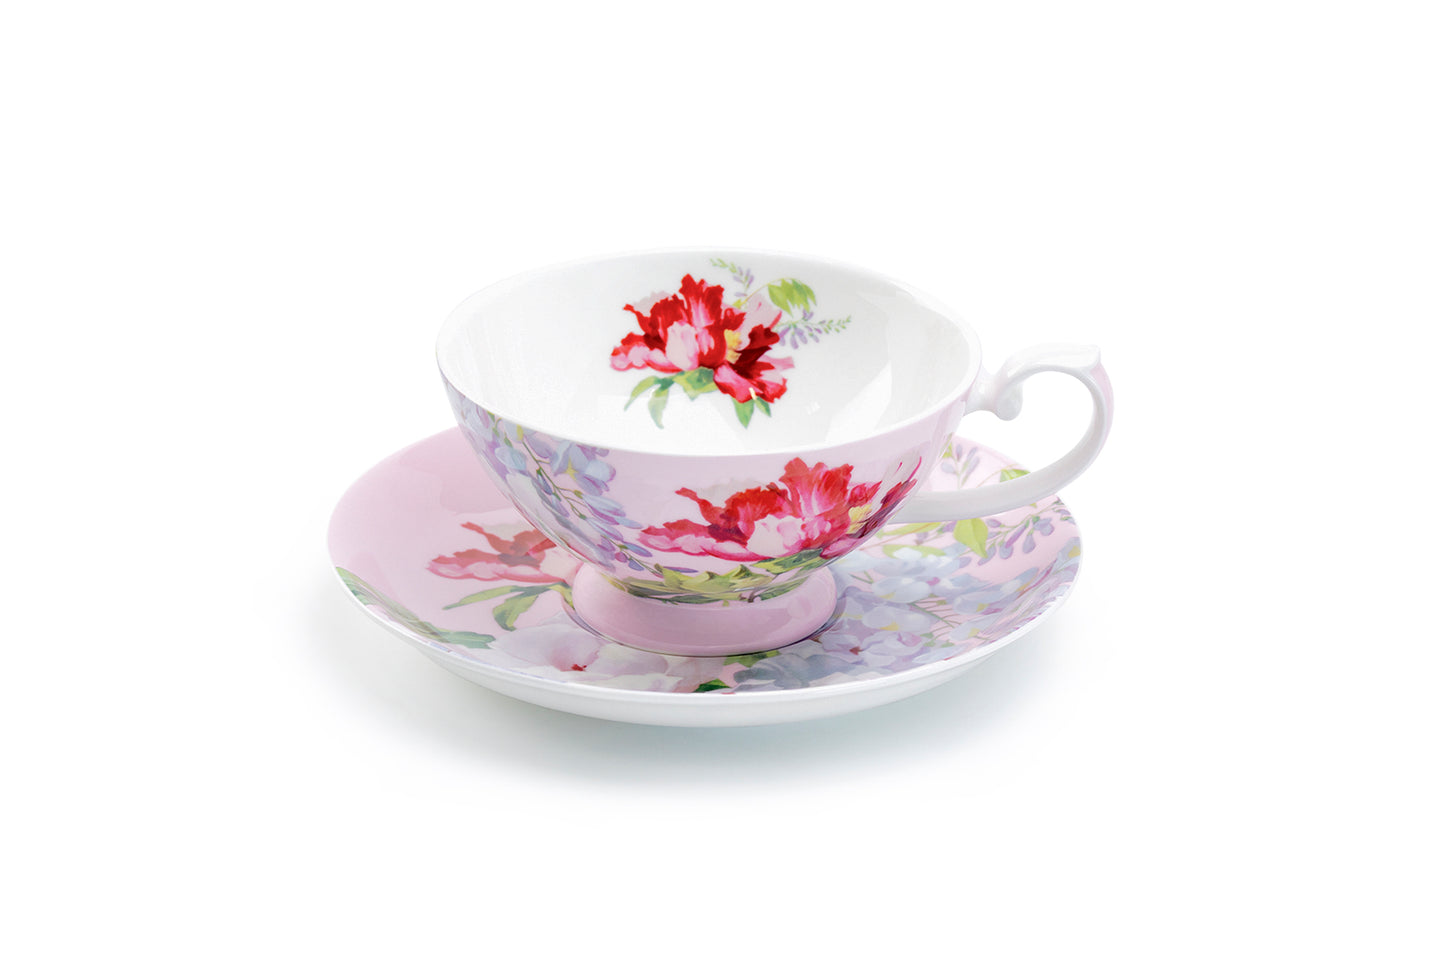 Red Peony Pink Bone China Cup and Saucer